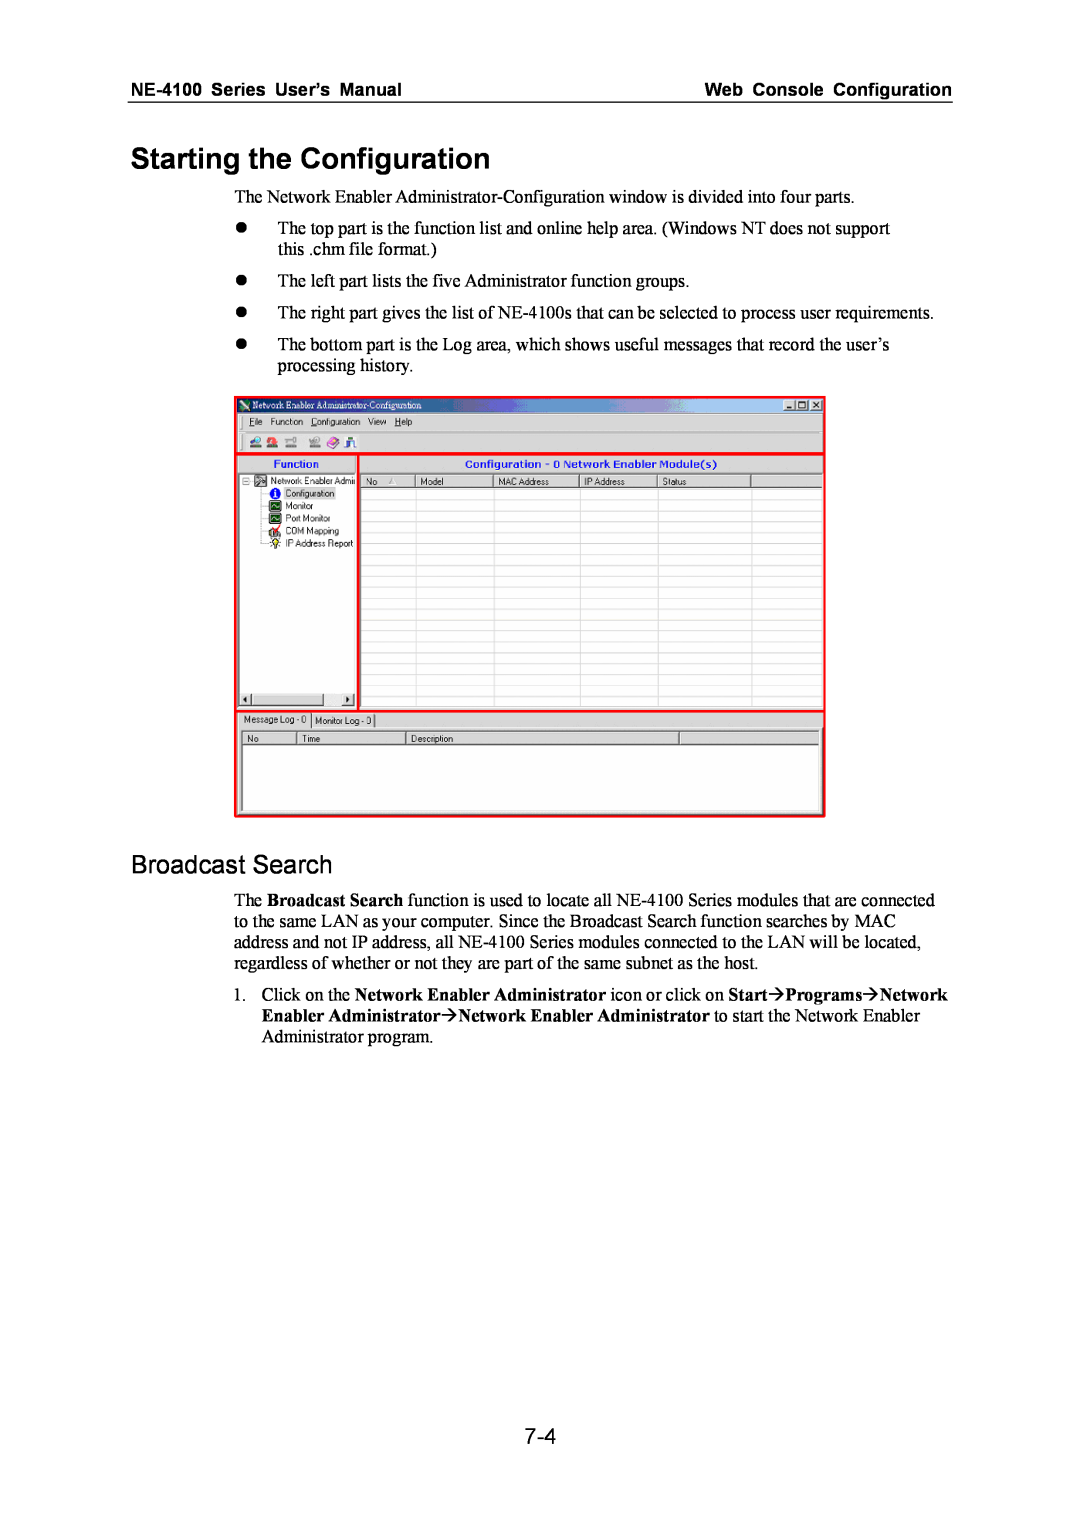 Moxa Technologies Starting the Configuration, Broadcast Search, NE-4100 Series User’s Manual, Web Console Configuration 